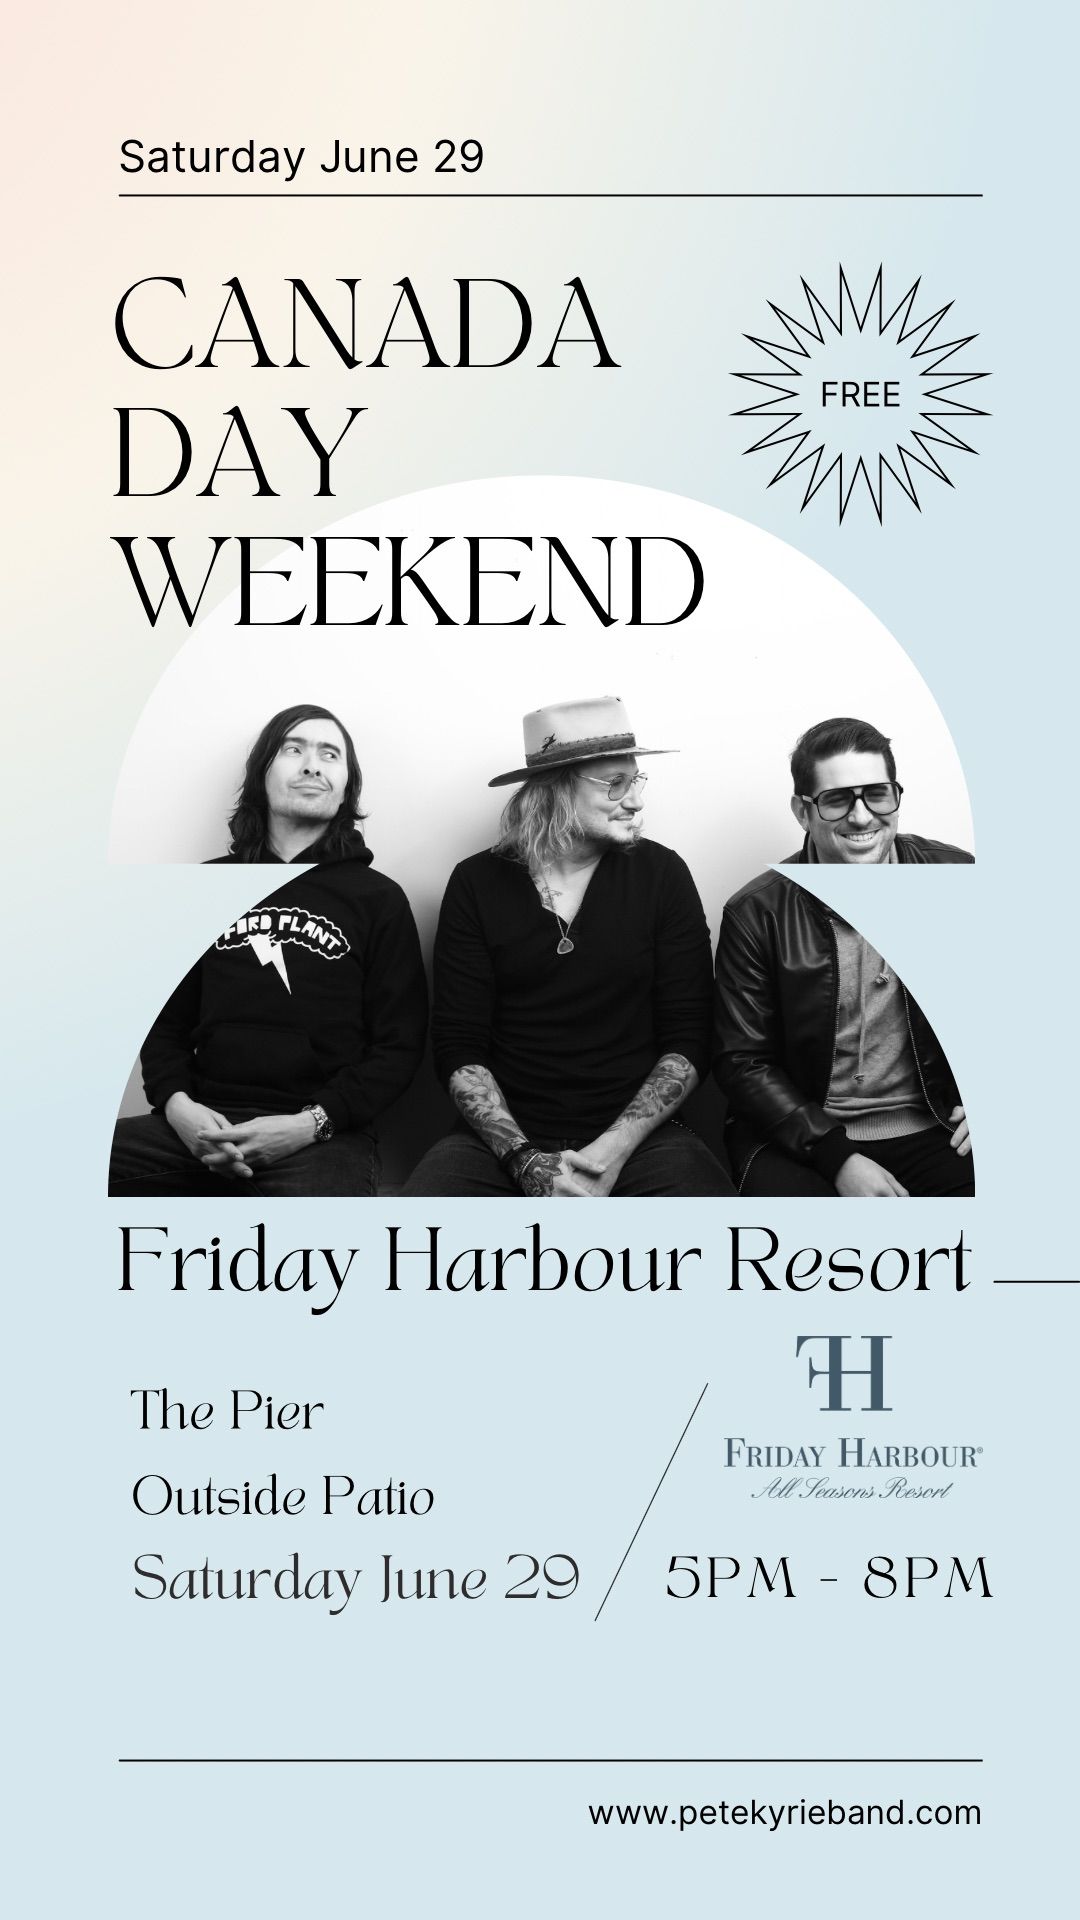 Pete Kyrie Band LIVE at Friday Harbour Resort